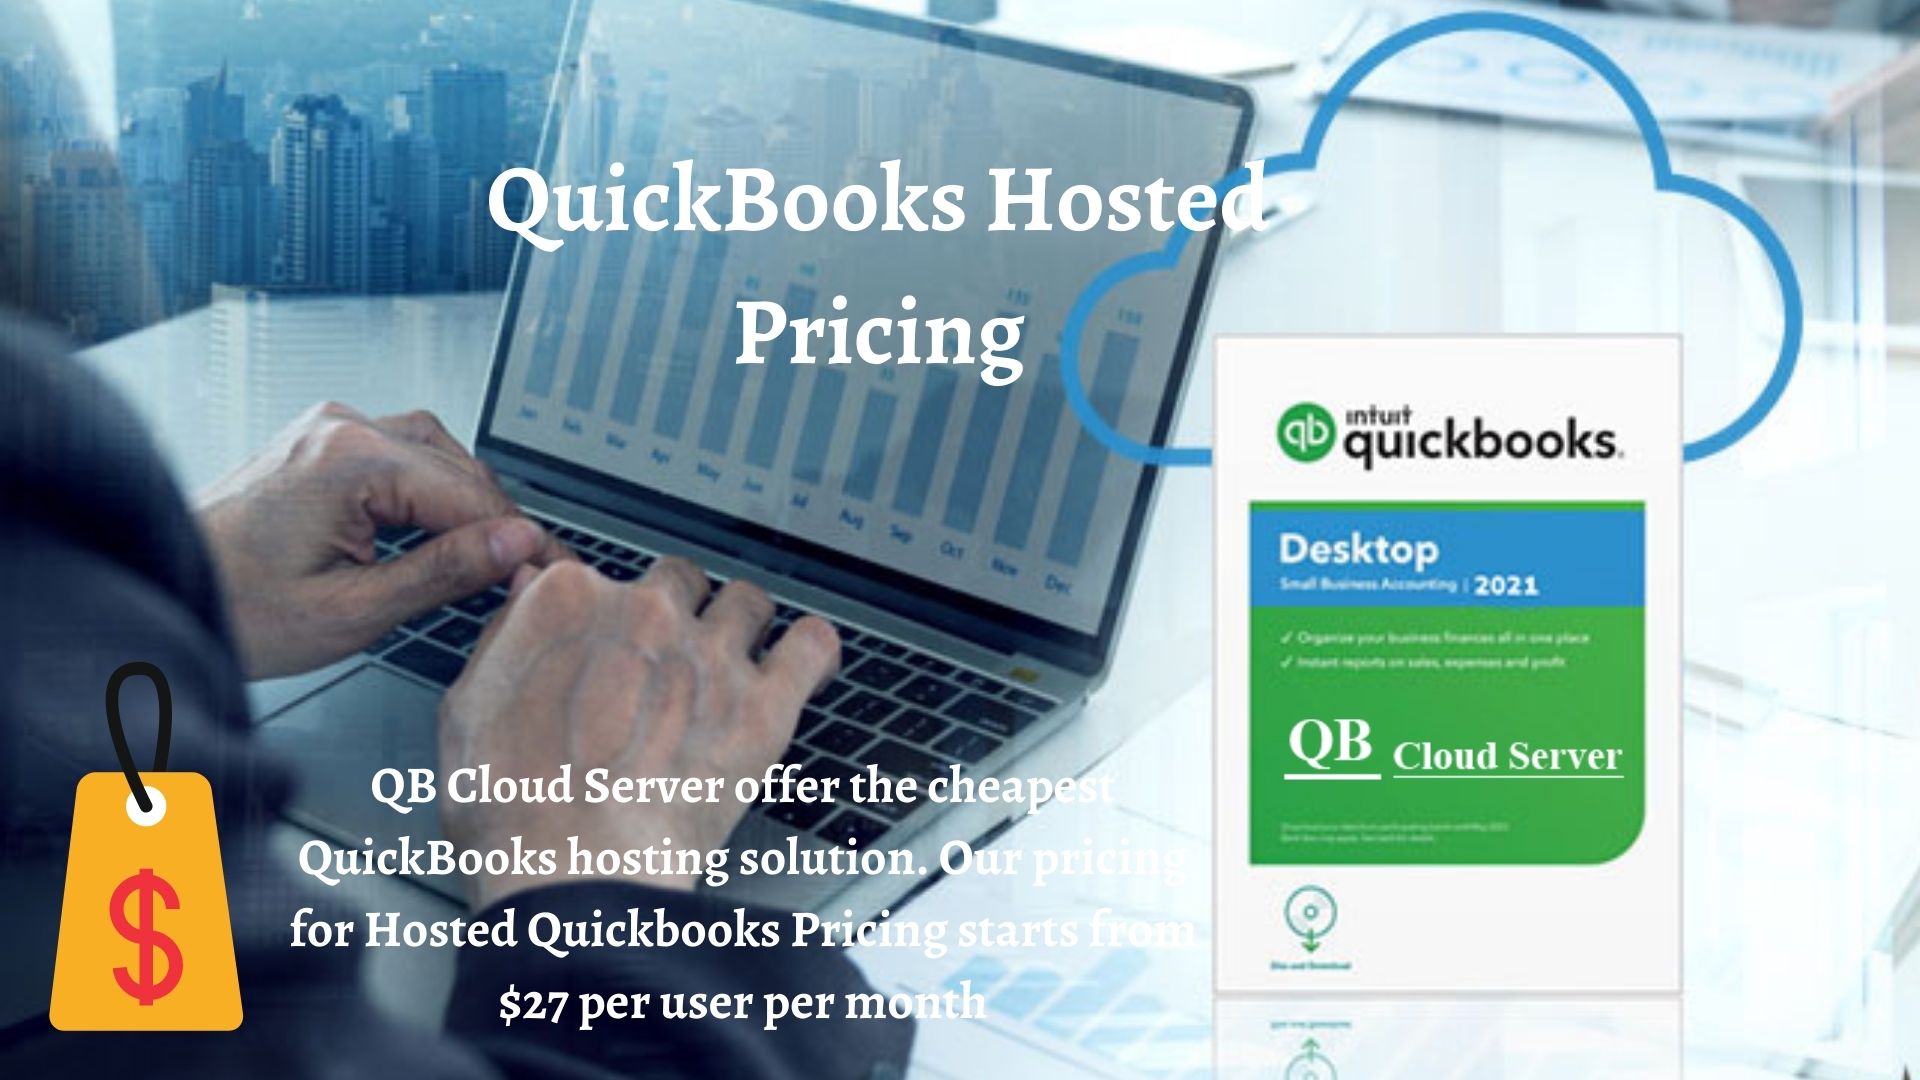 Hosted QuickBooks Pricing, QuickBooks Hosted Cost